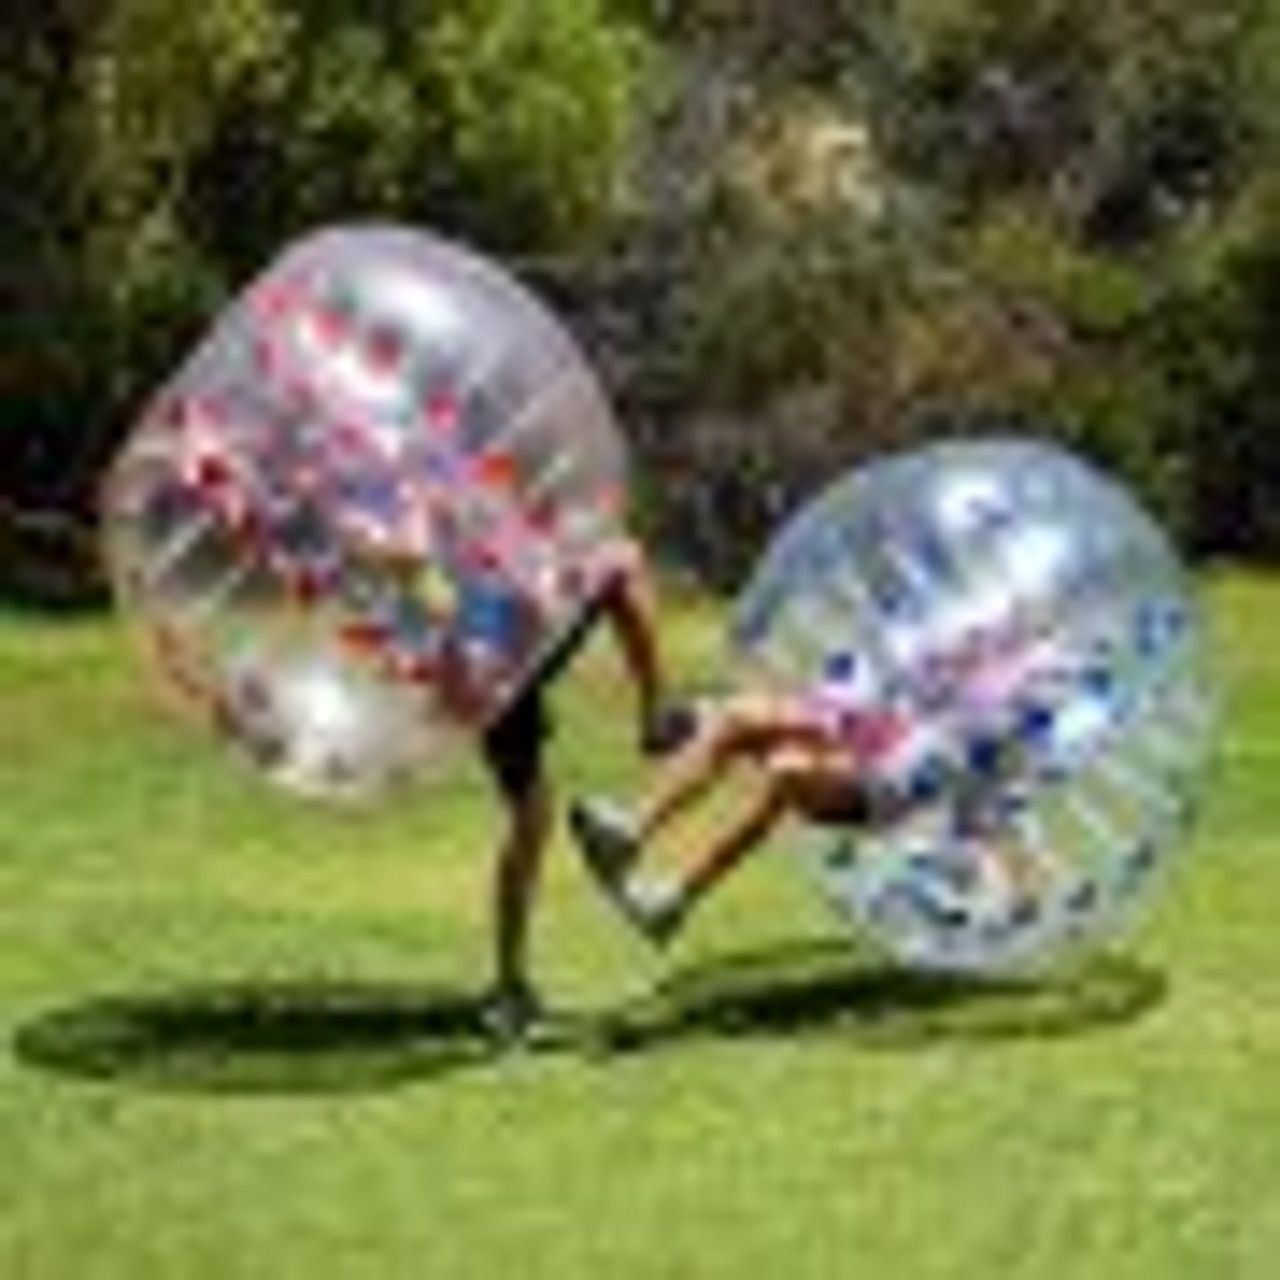 Inflatable Bumper Ball 4 FT / 1.2M Diameter, Bubble Soccer Ball, Blow It Up in 5 Min, Inflatable Zorb Ball for Adults or Children (4 FT, Red Dot)